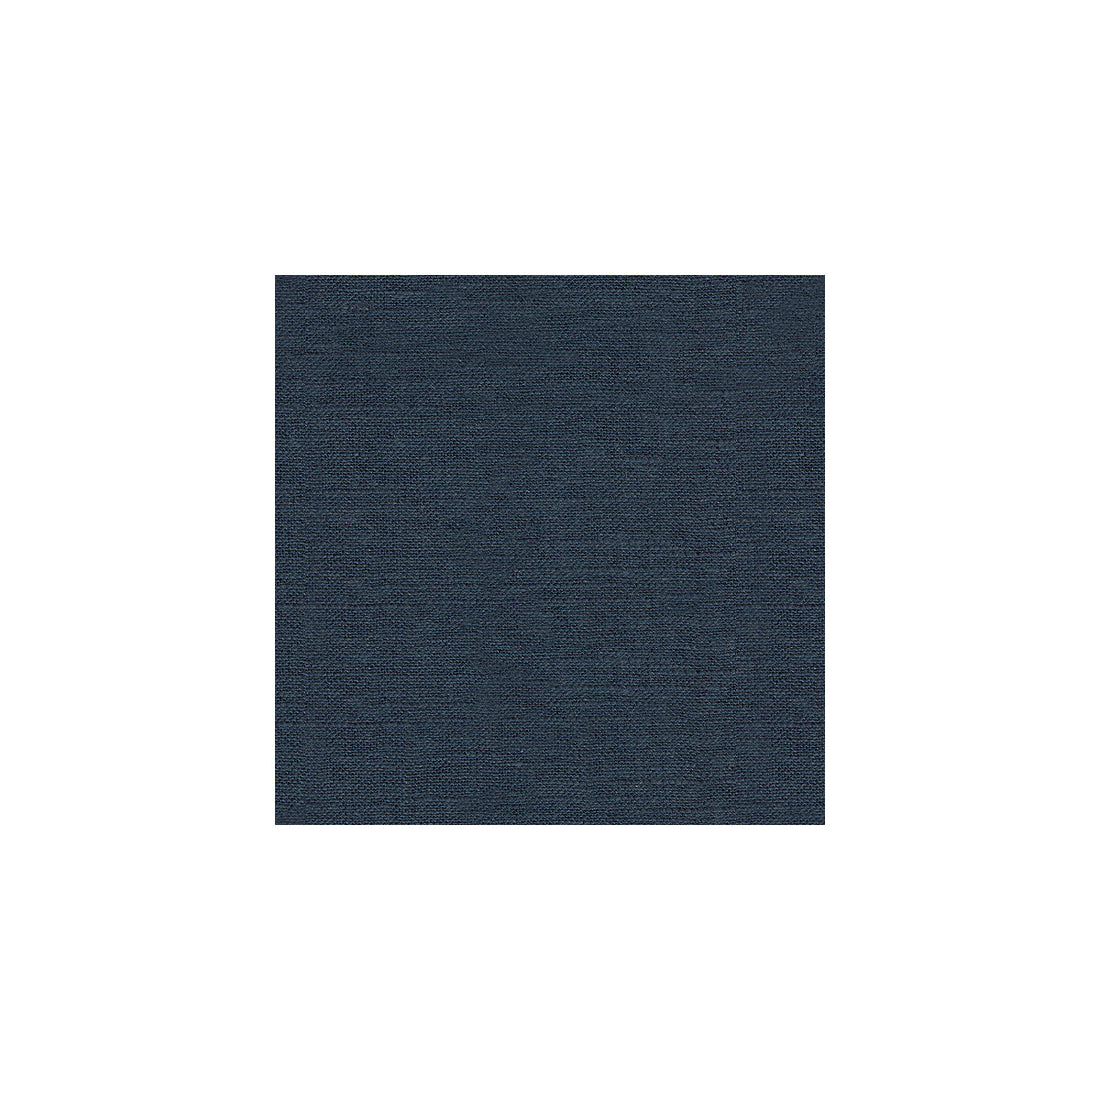 Barnegat fabric in denim color - pattern 24573.505.0 - by Kravet Basics in the Perfect Plains collection